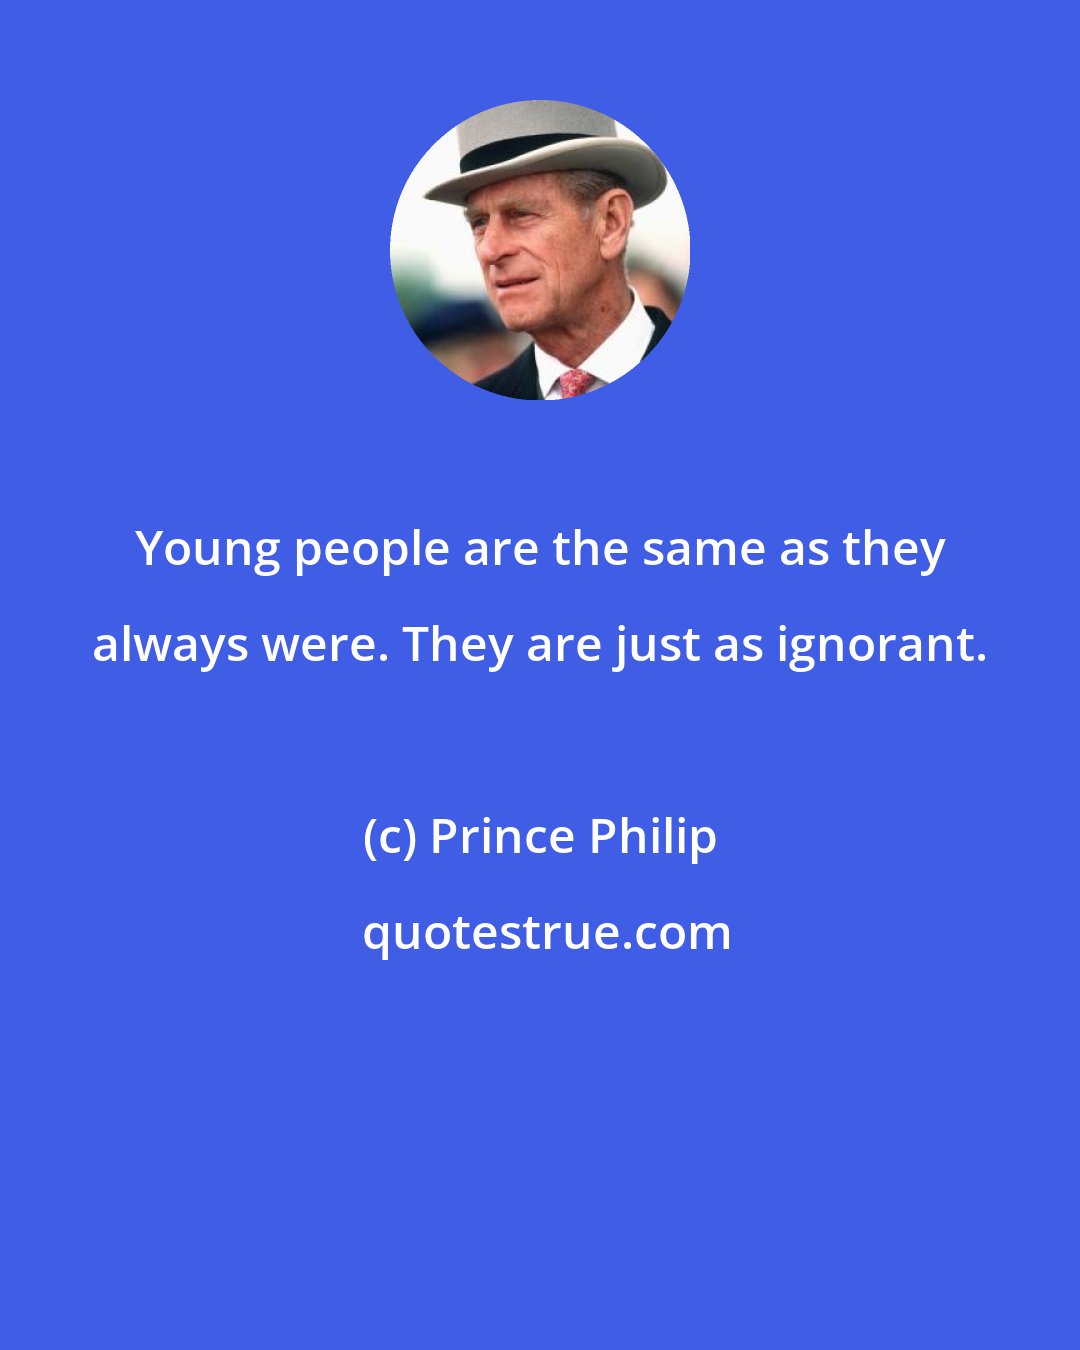 Prince Philip: Young people are the same as they always were. They are just as ignorant.